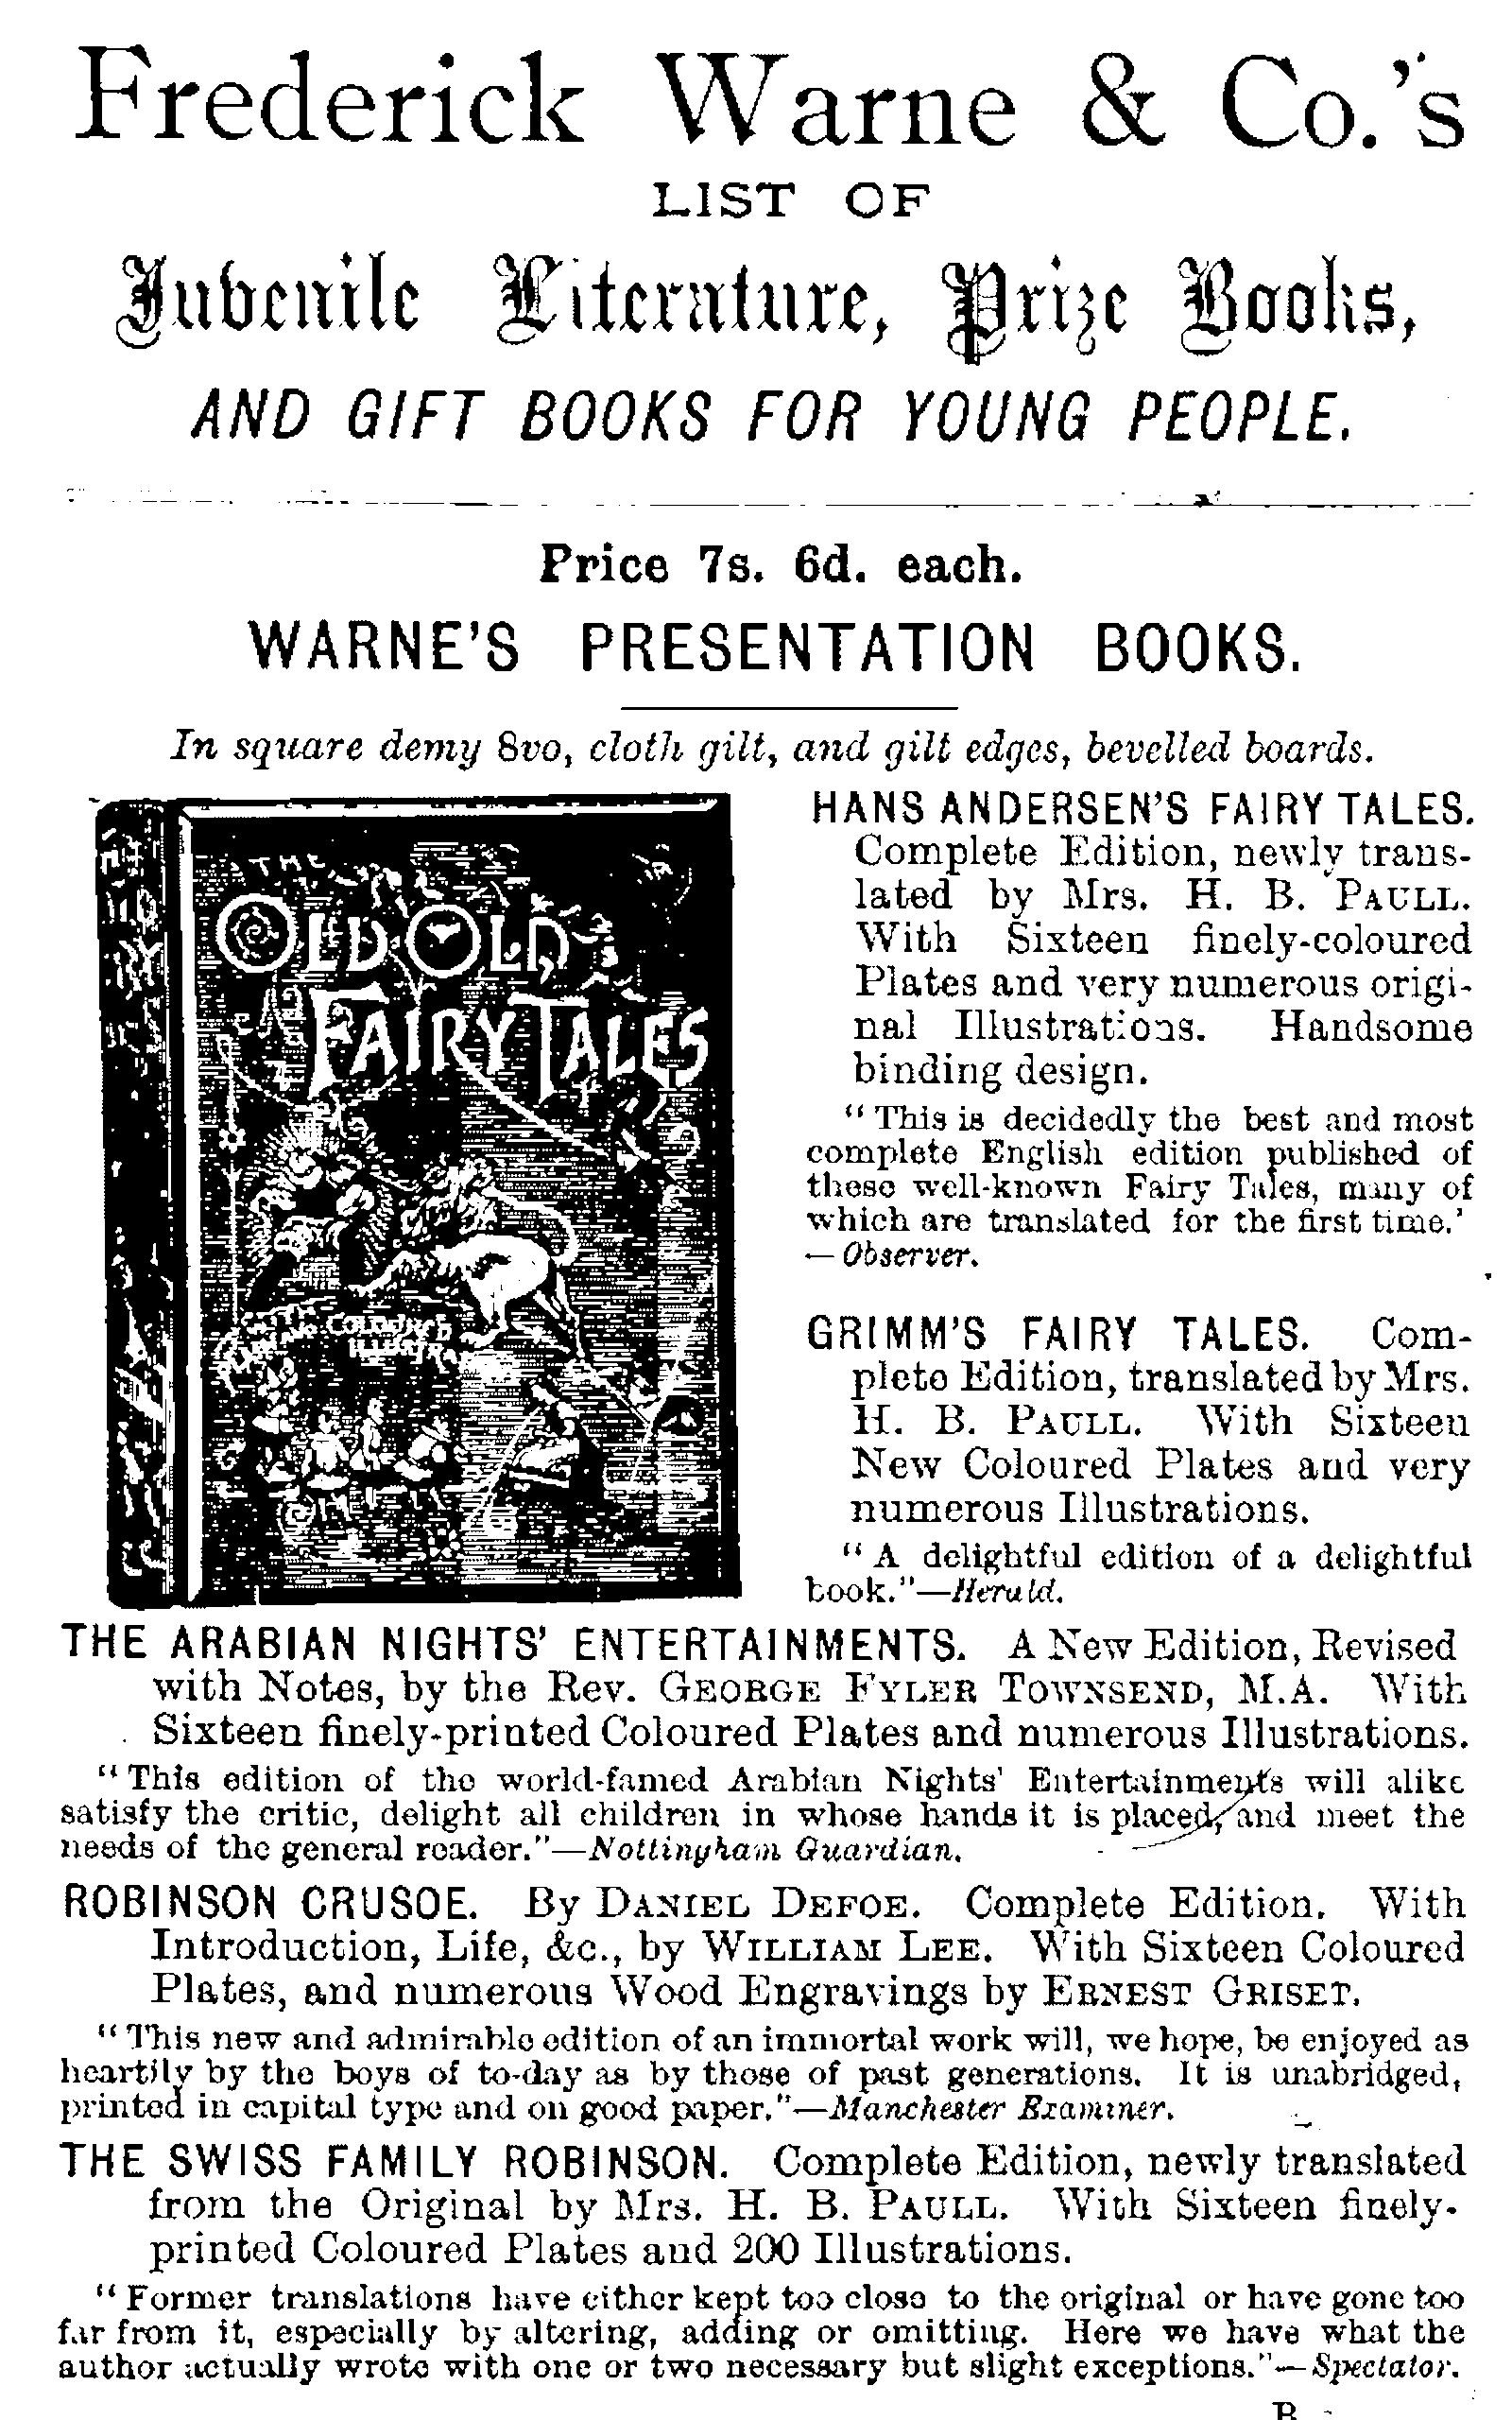 Frederick Warne & Co.'s list of juvenile literature, prize books, and gift books for young people